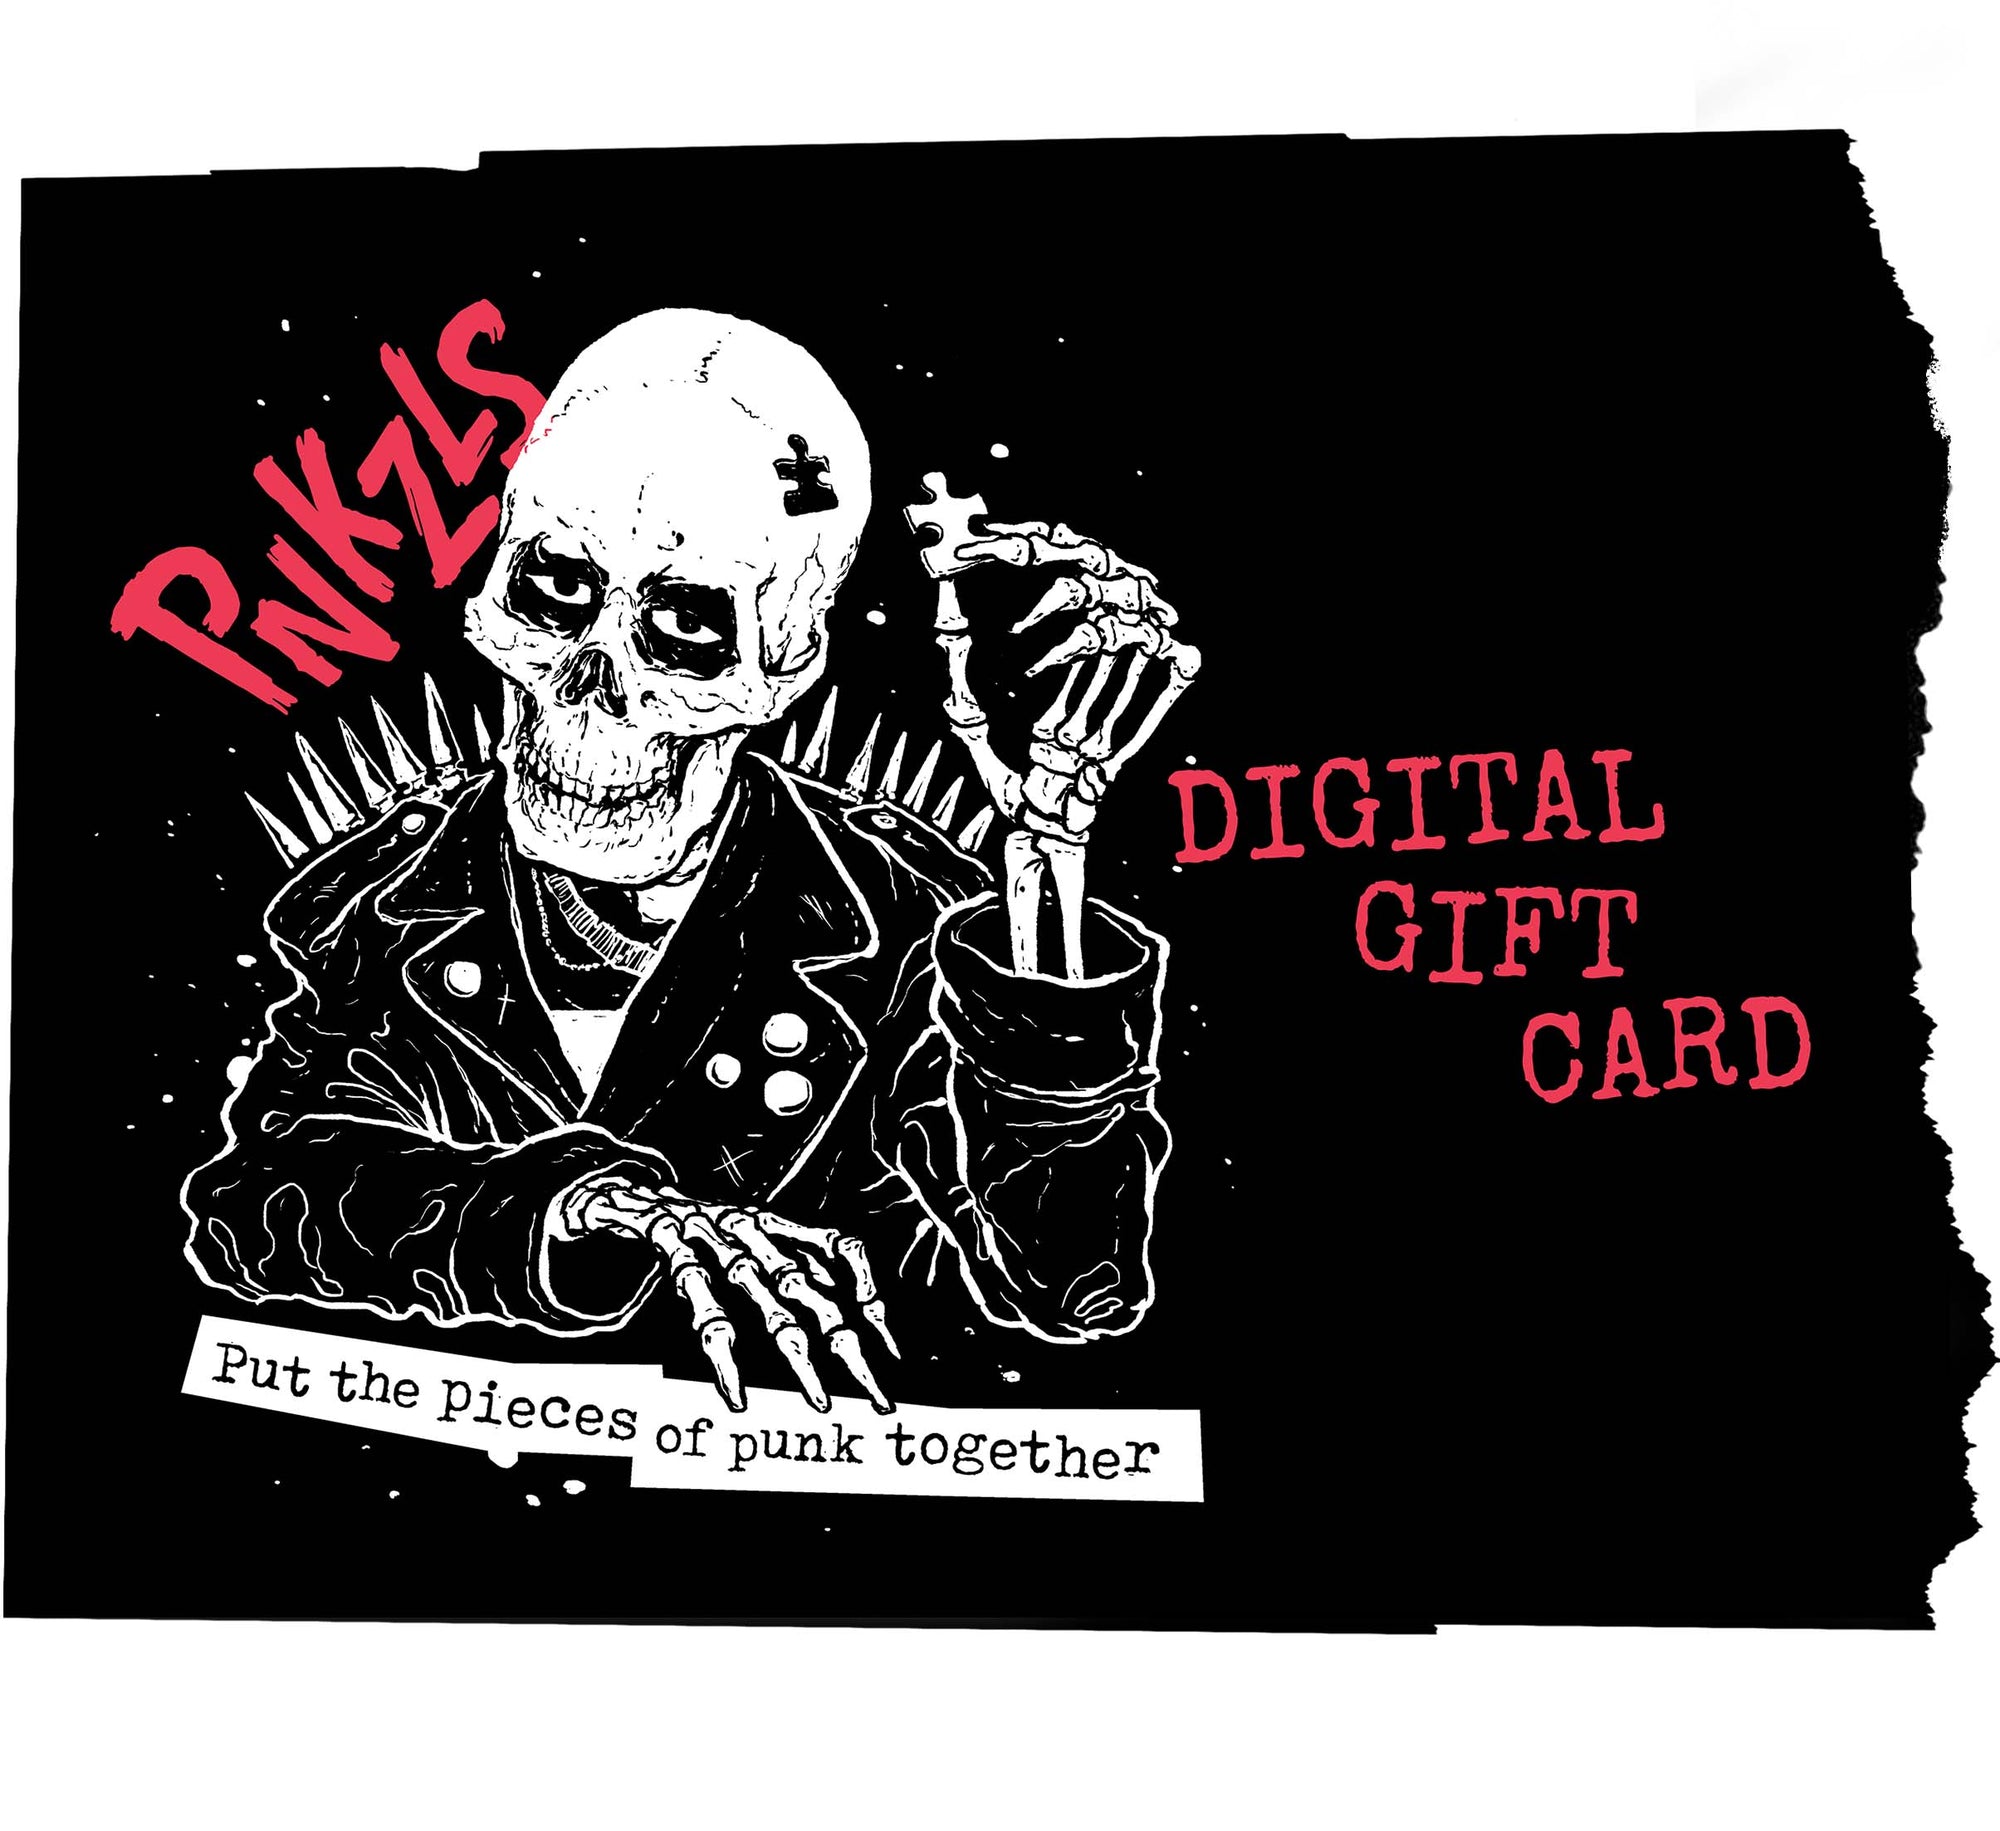 Digital giftcard graphic | Put the pieces of punk together